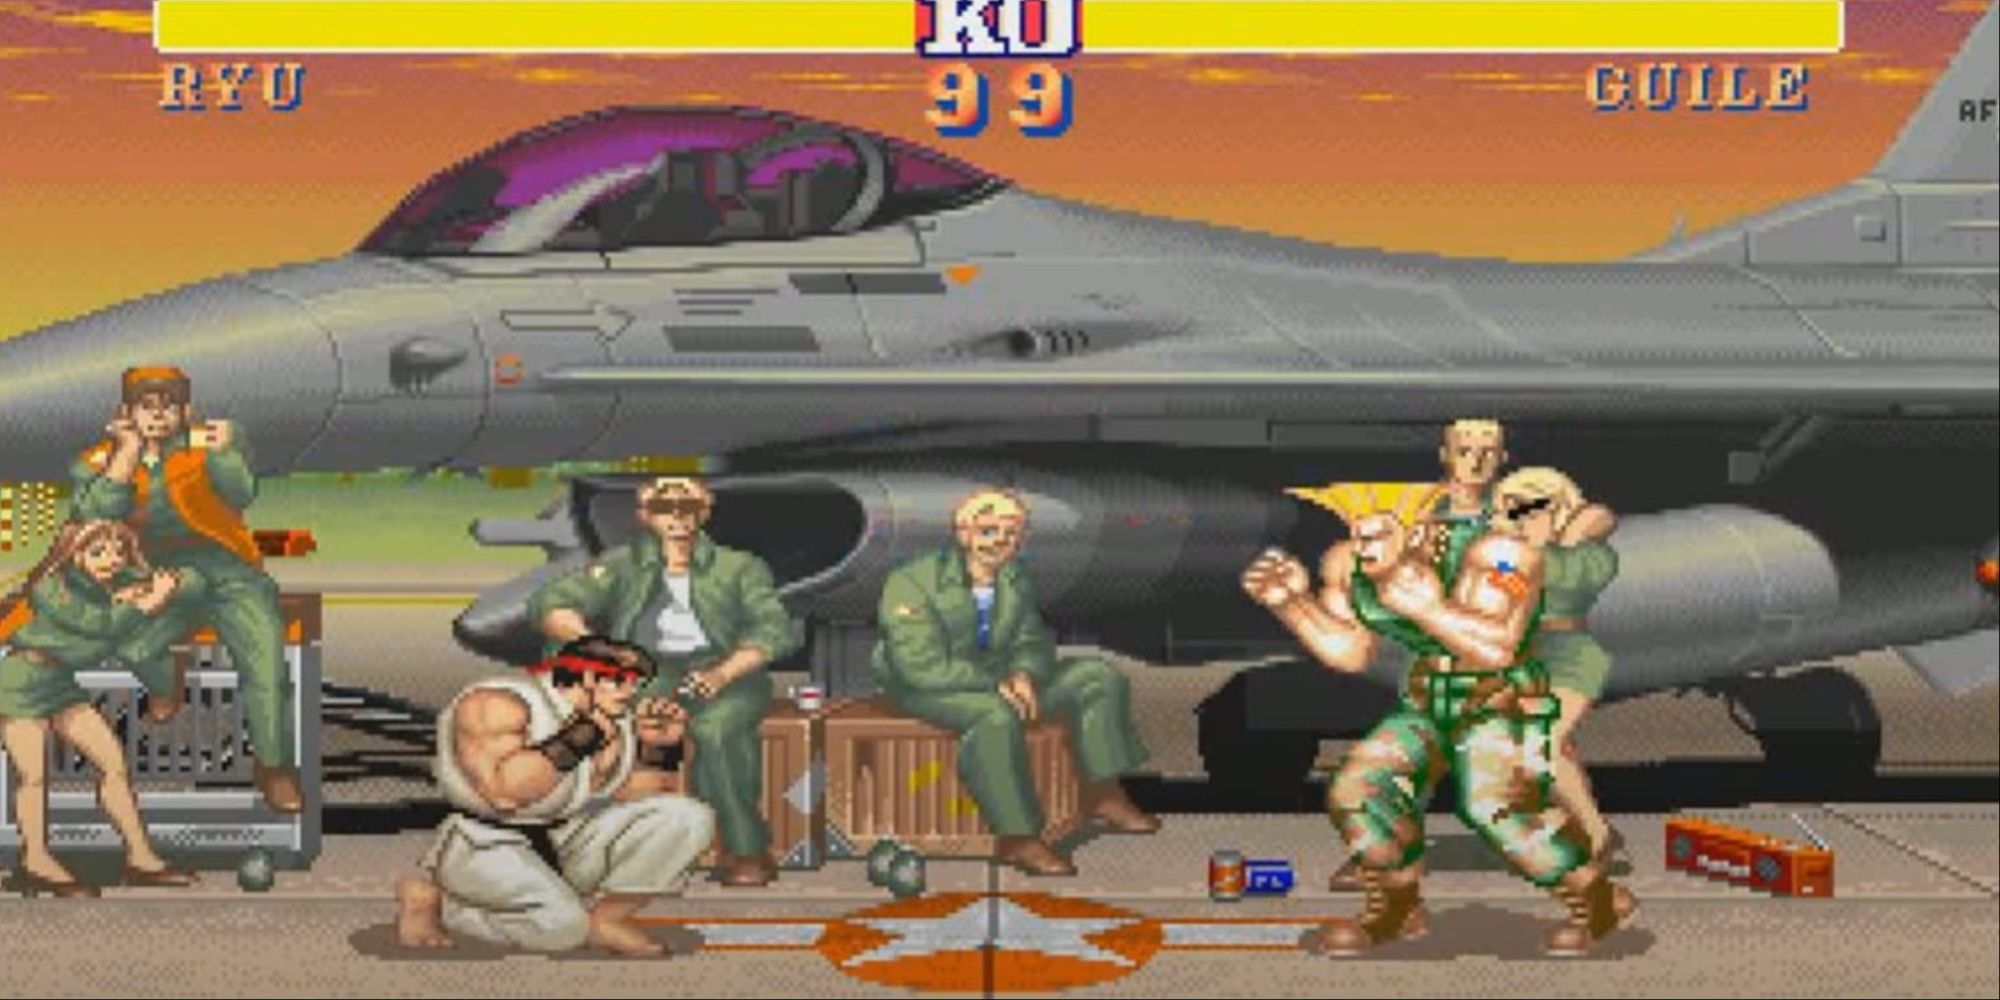 Guile fighting Ryu